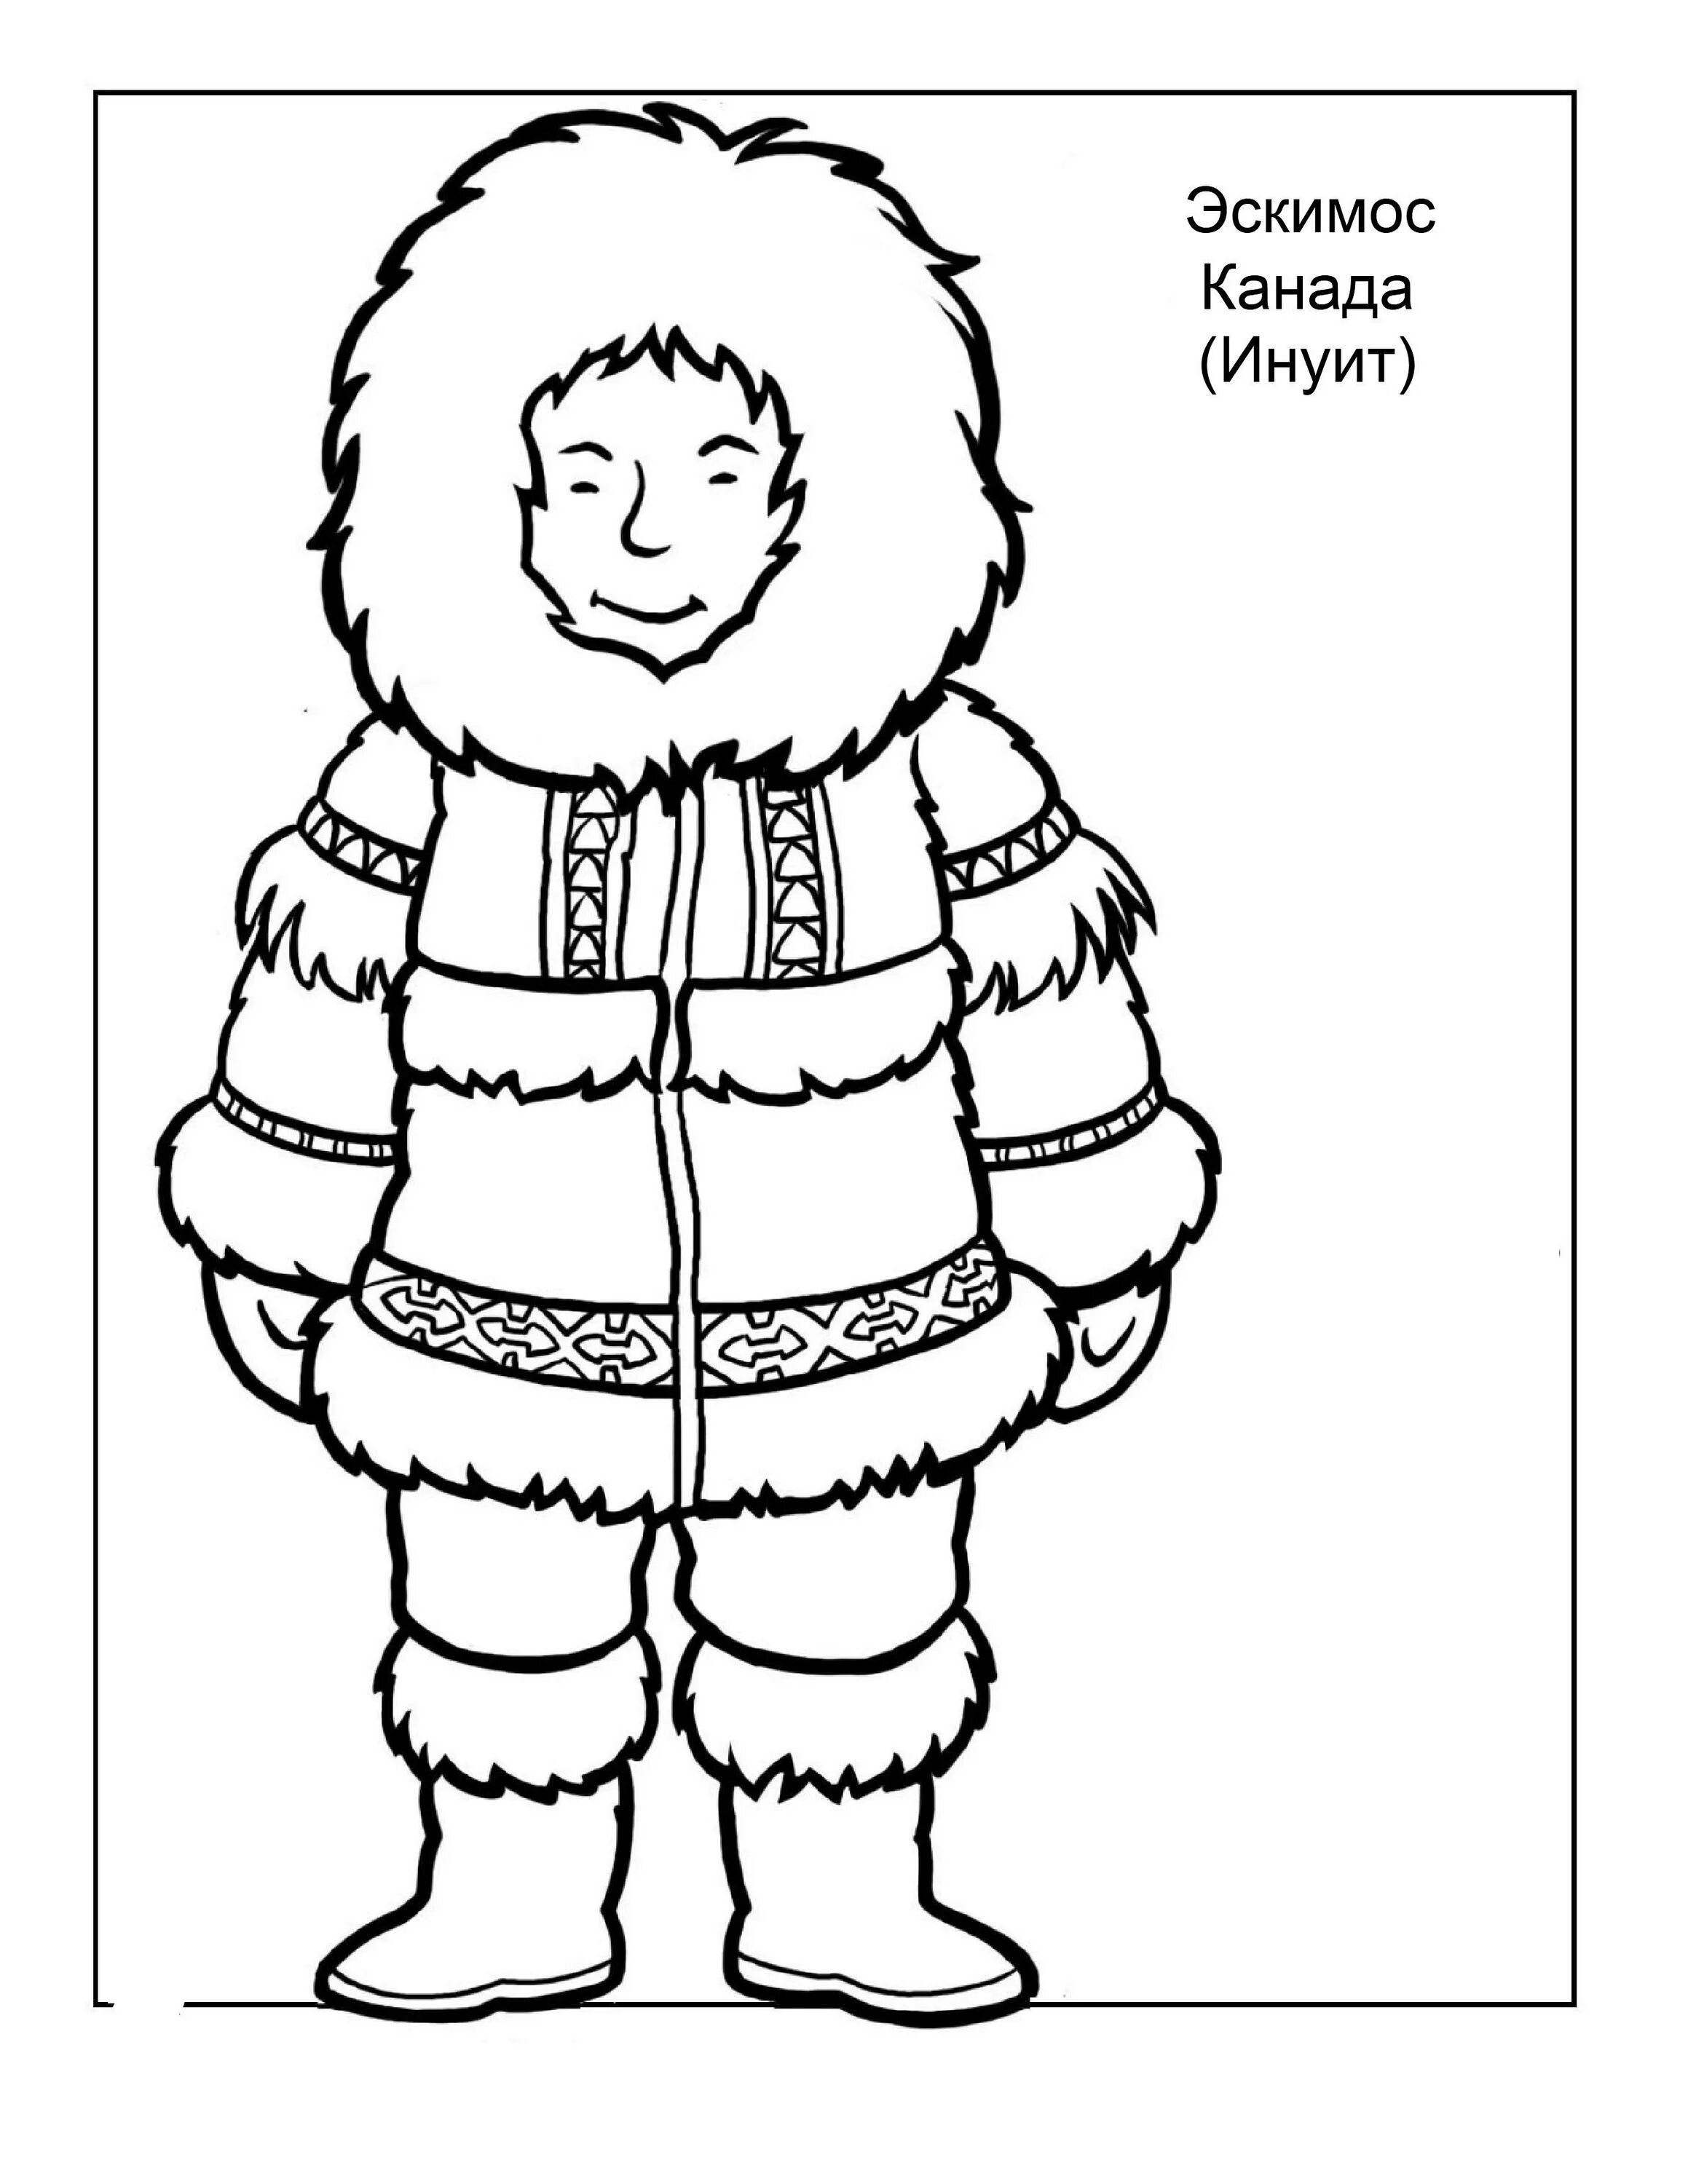 Sami invitation coloring pages for kids